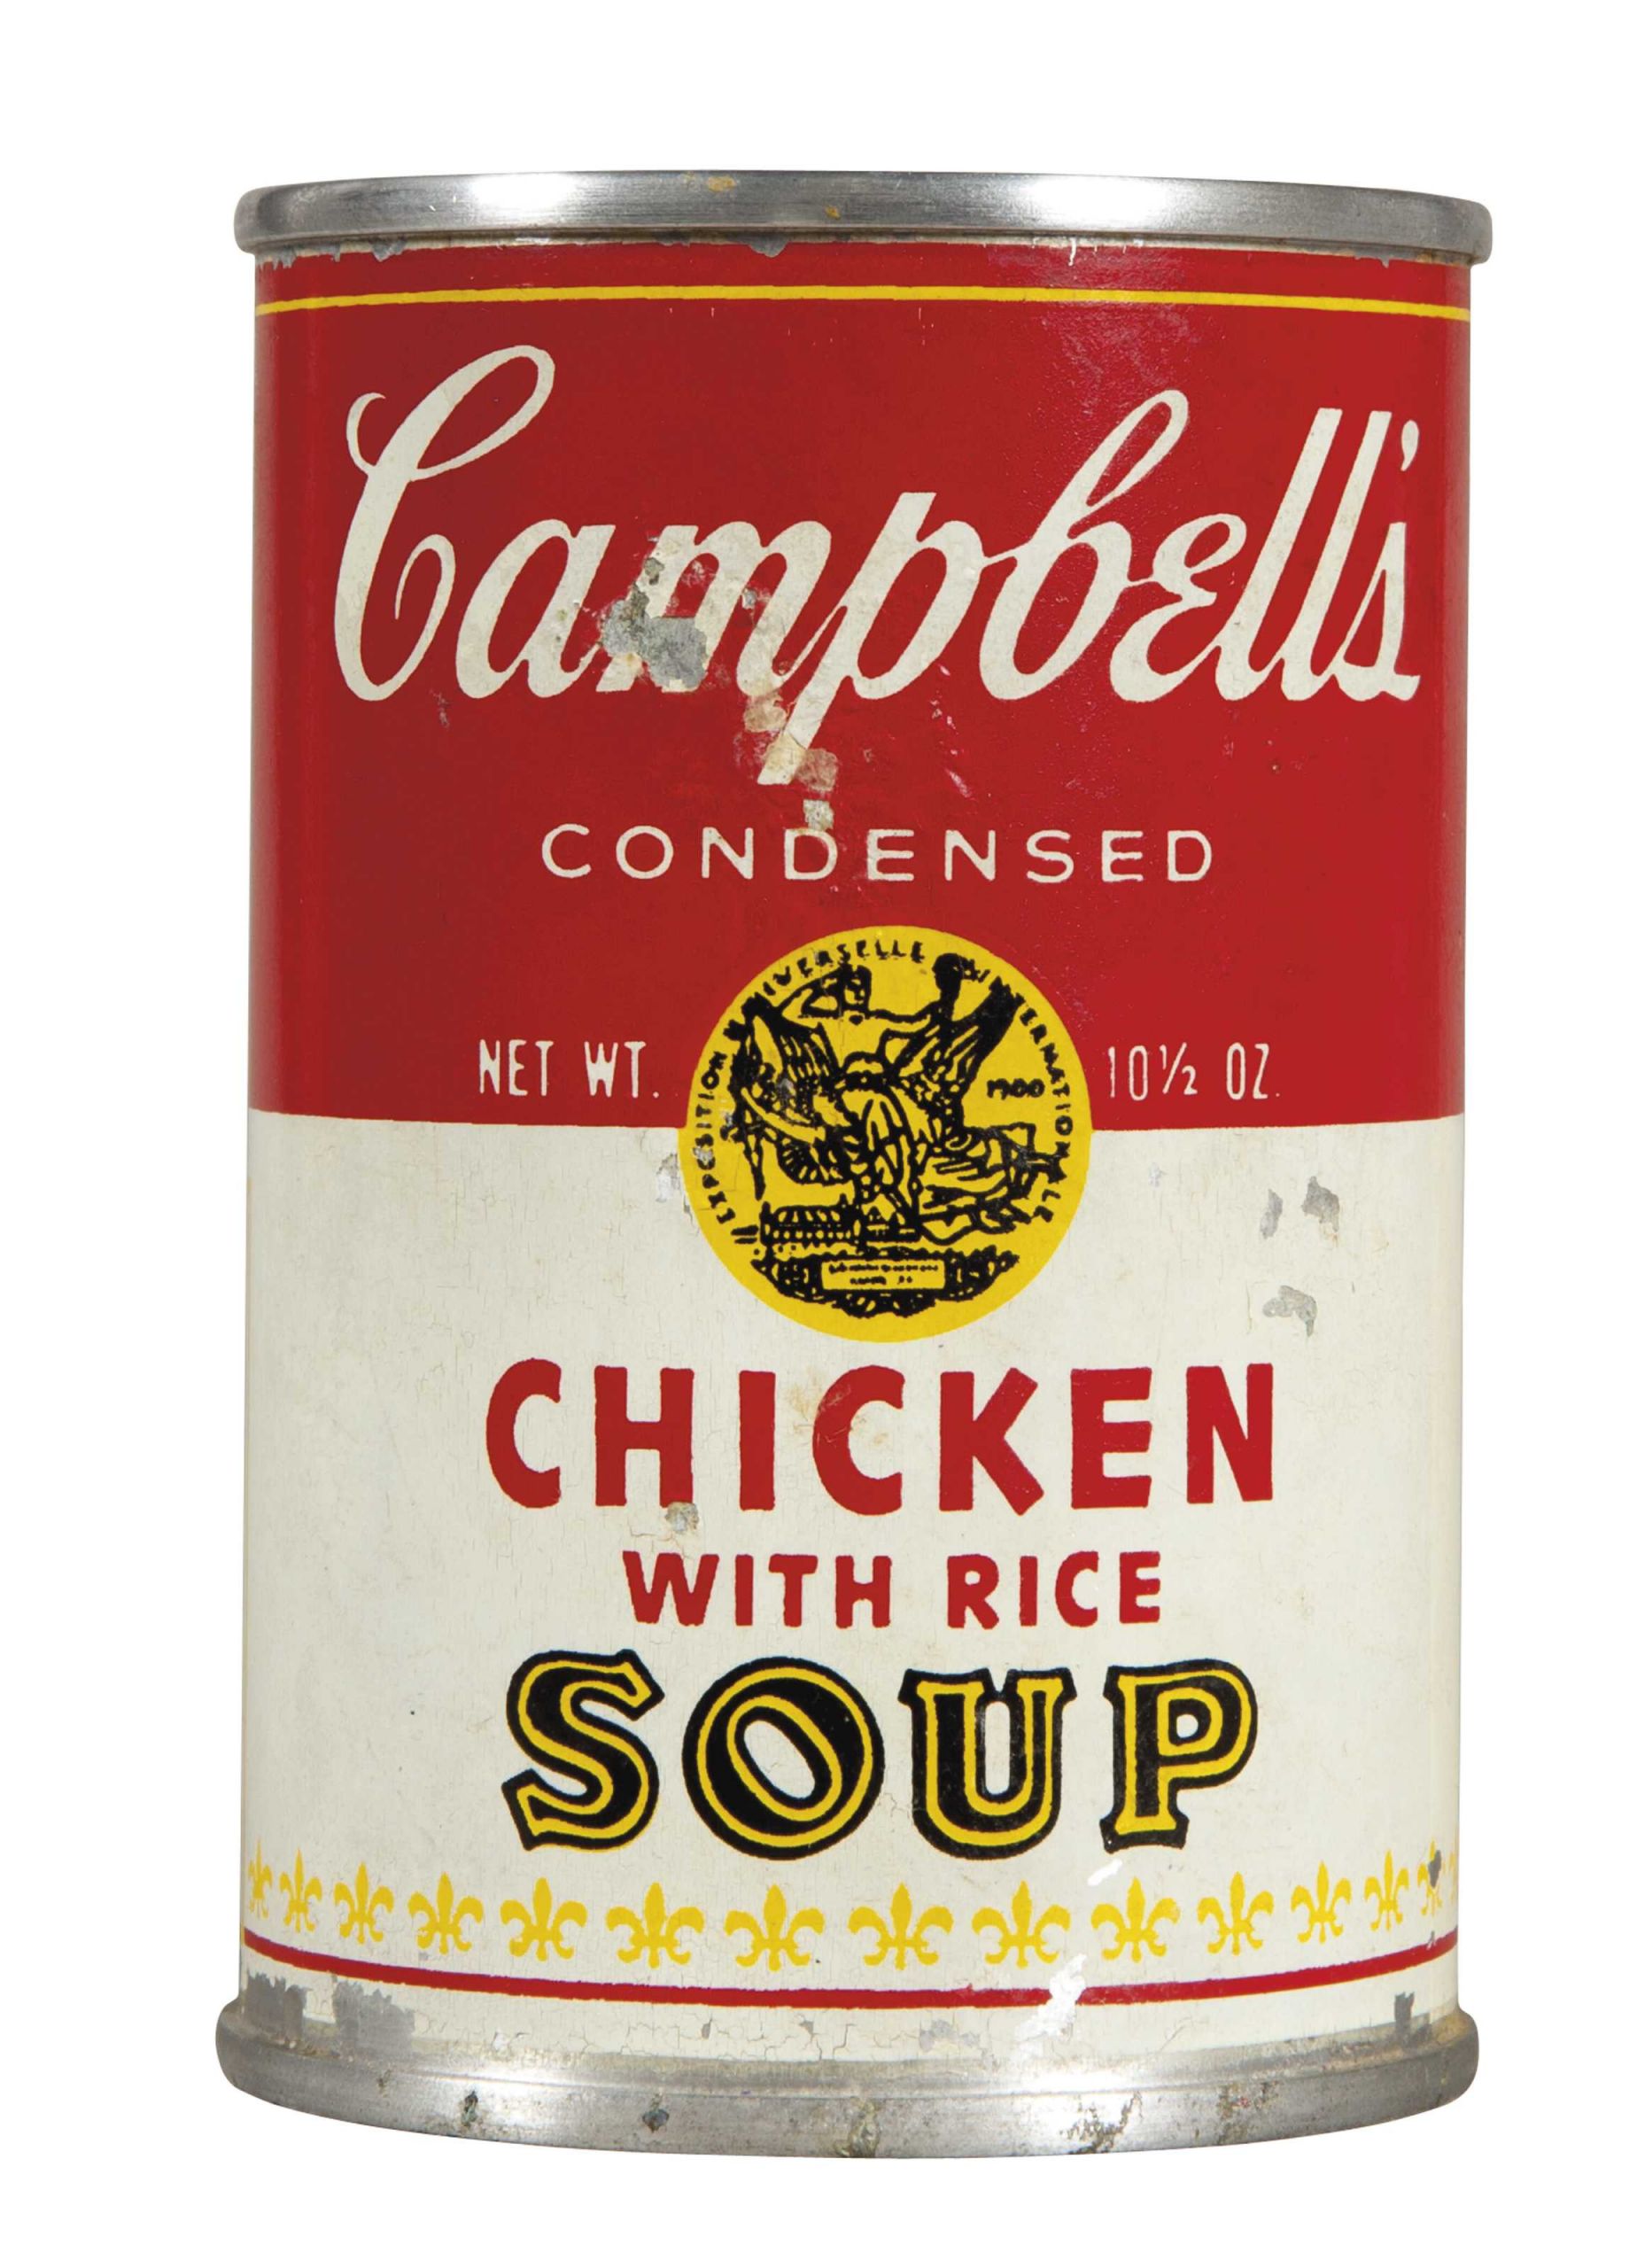 Campbells Soup Chicken And Rice
 Campbell s Chicken with Rice Soup ANDY WARHOL 1928 1987